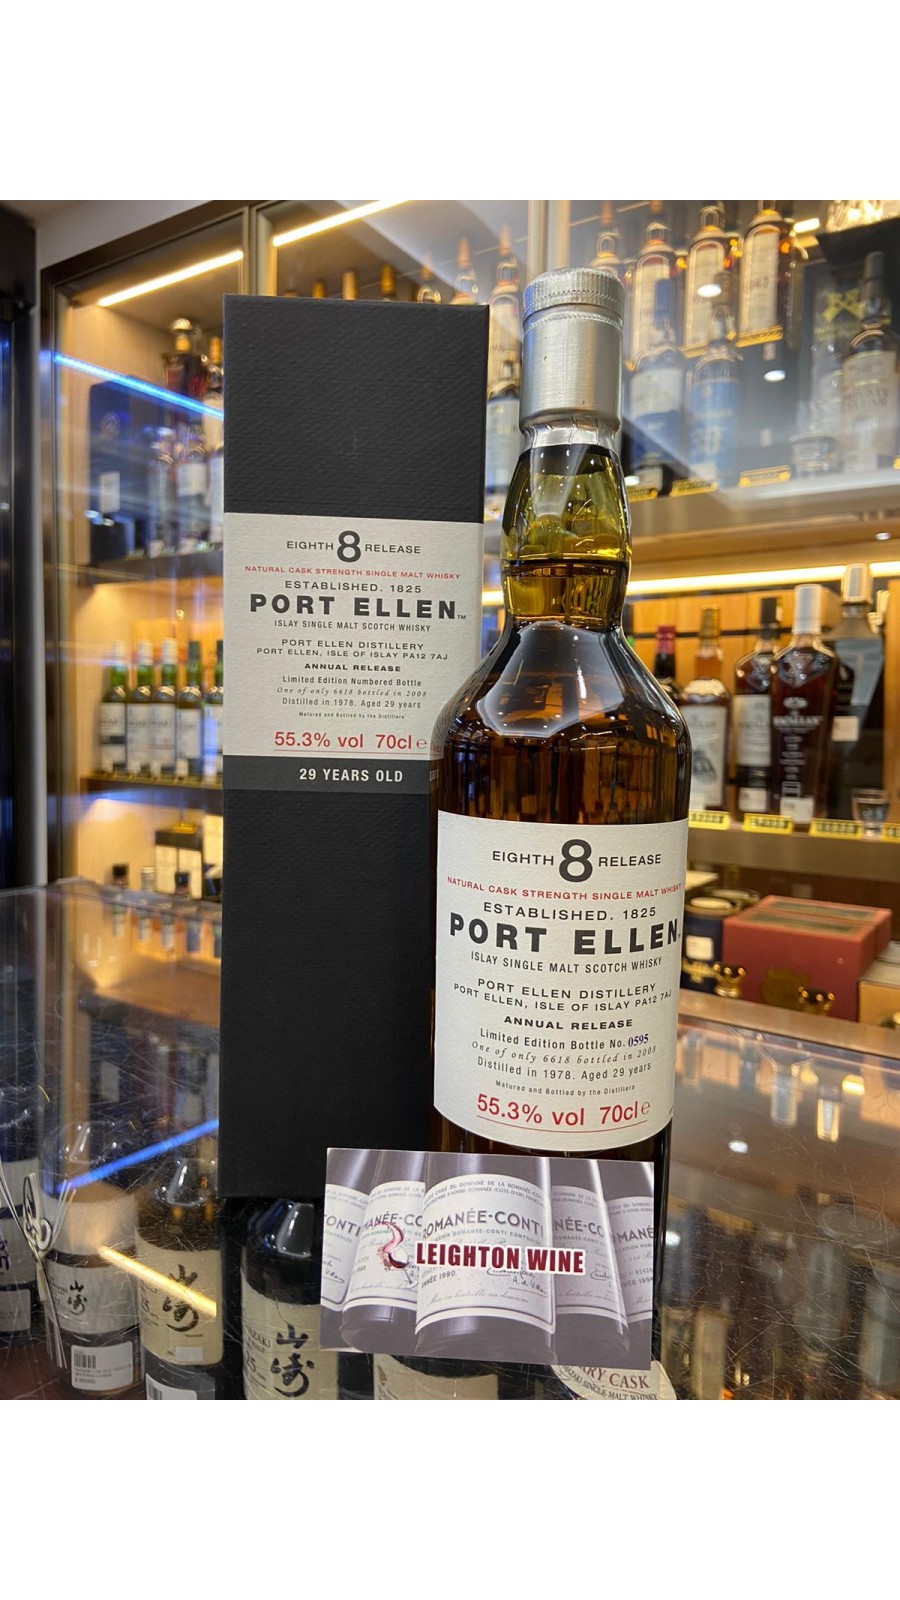 Port Ellen 29 Year Old 1978 - 8th Release (2008 Special Release) (70cl, 55.3%)